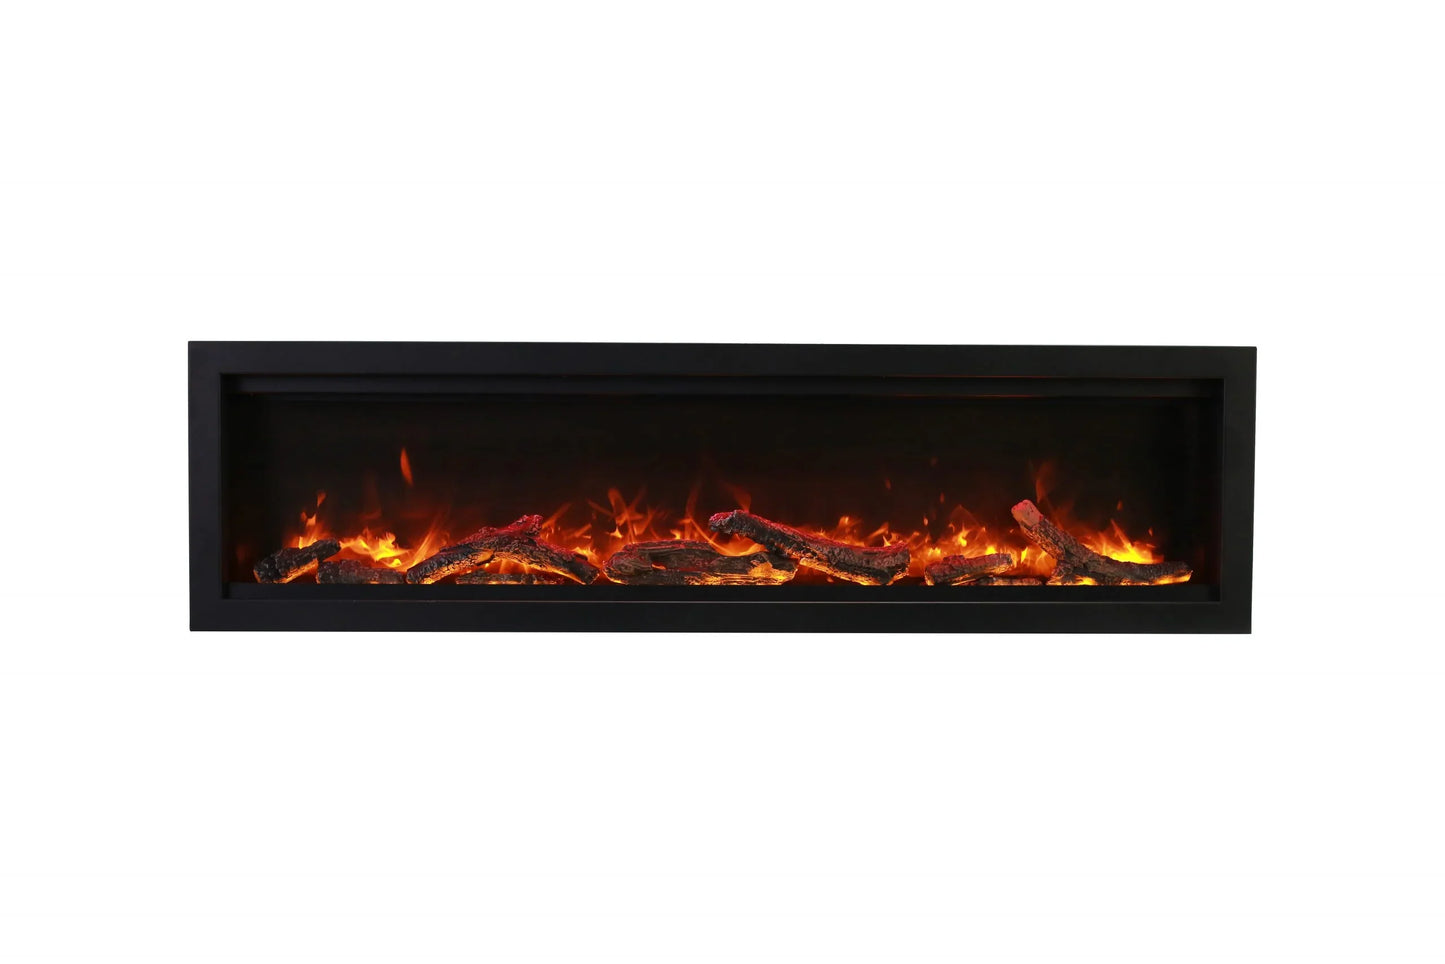 WM – Electric Fireplace | Remii | Indoor | Outdoor | Multi-function Remote | Buy Fireplaces Online